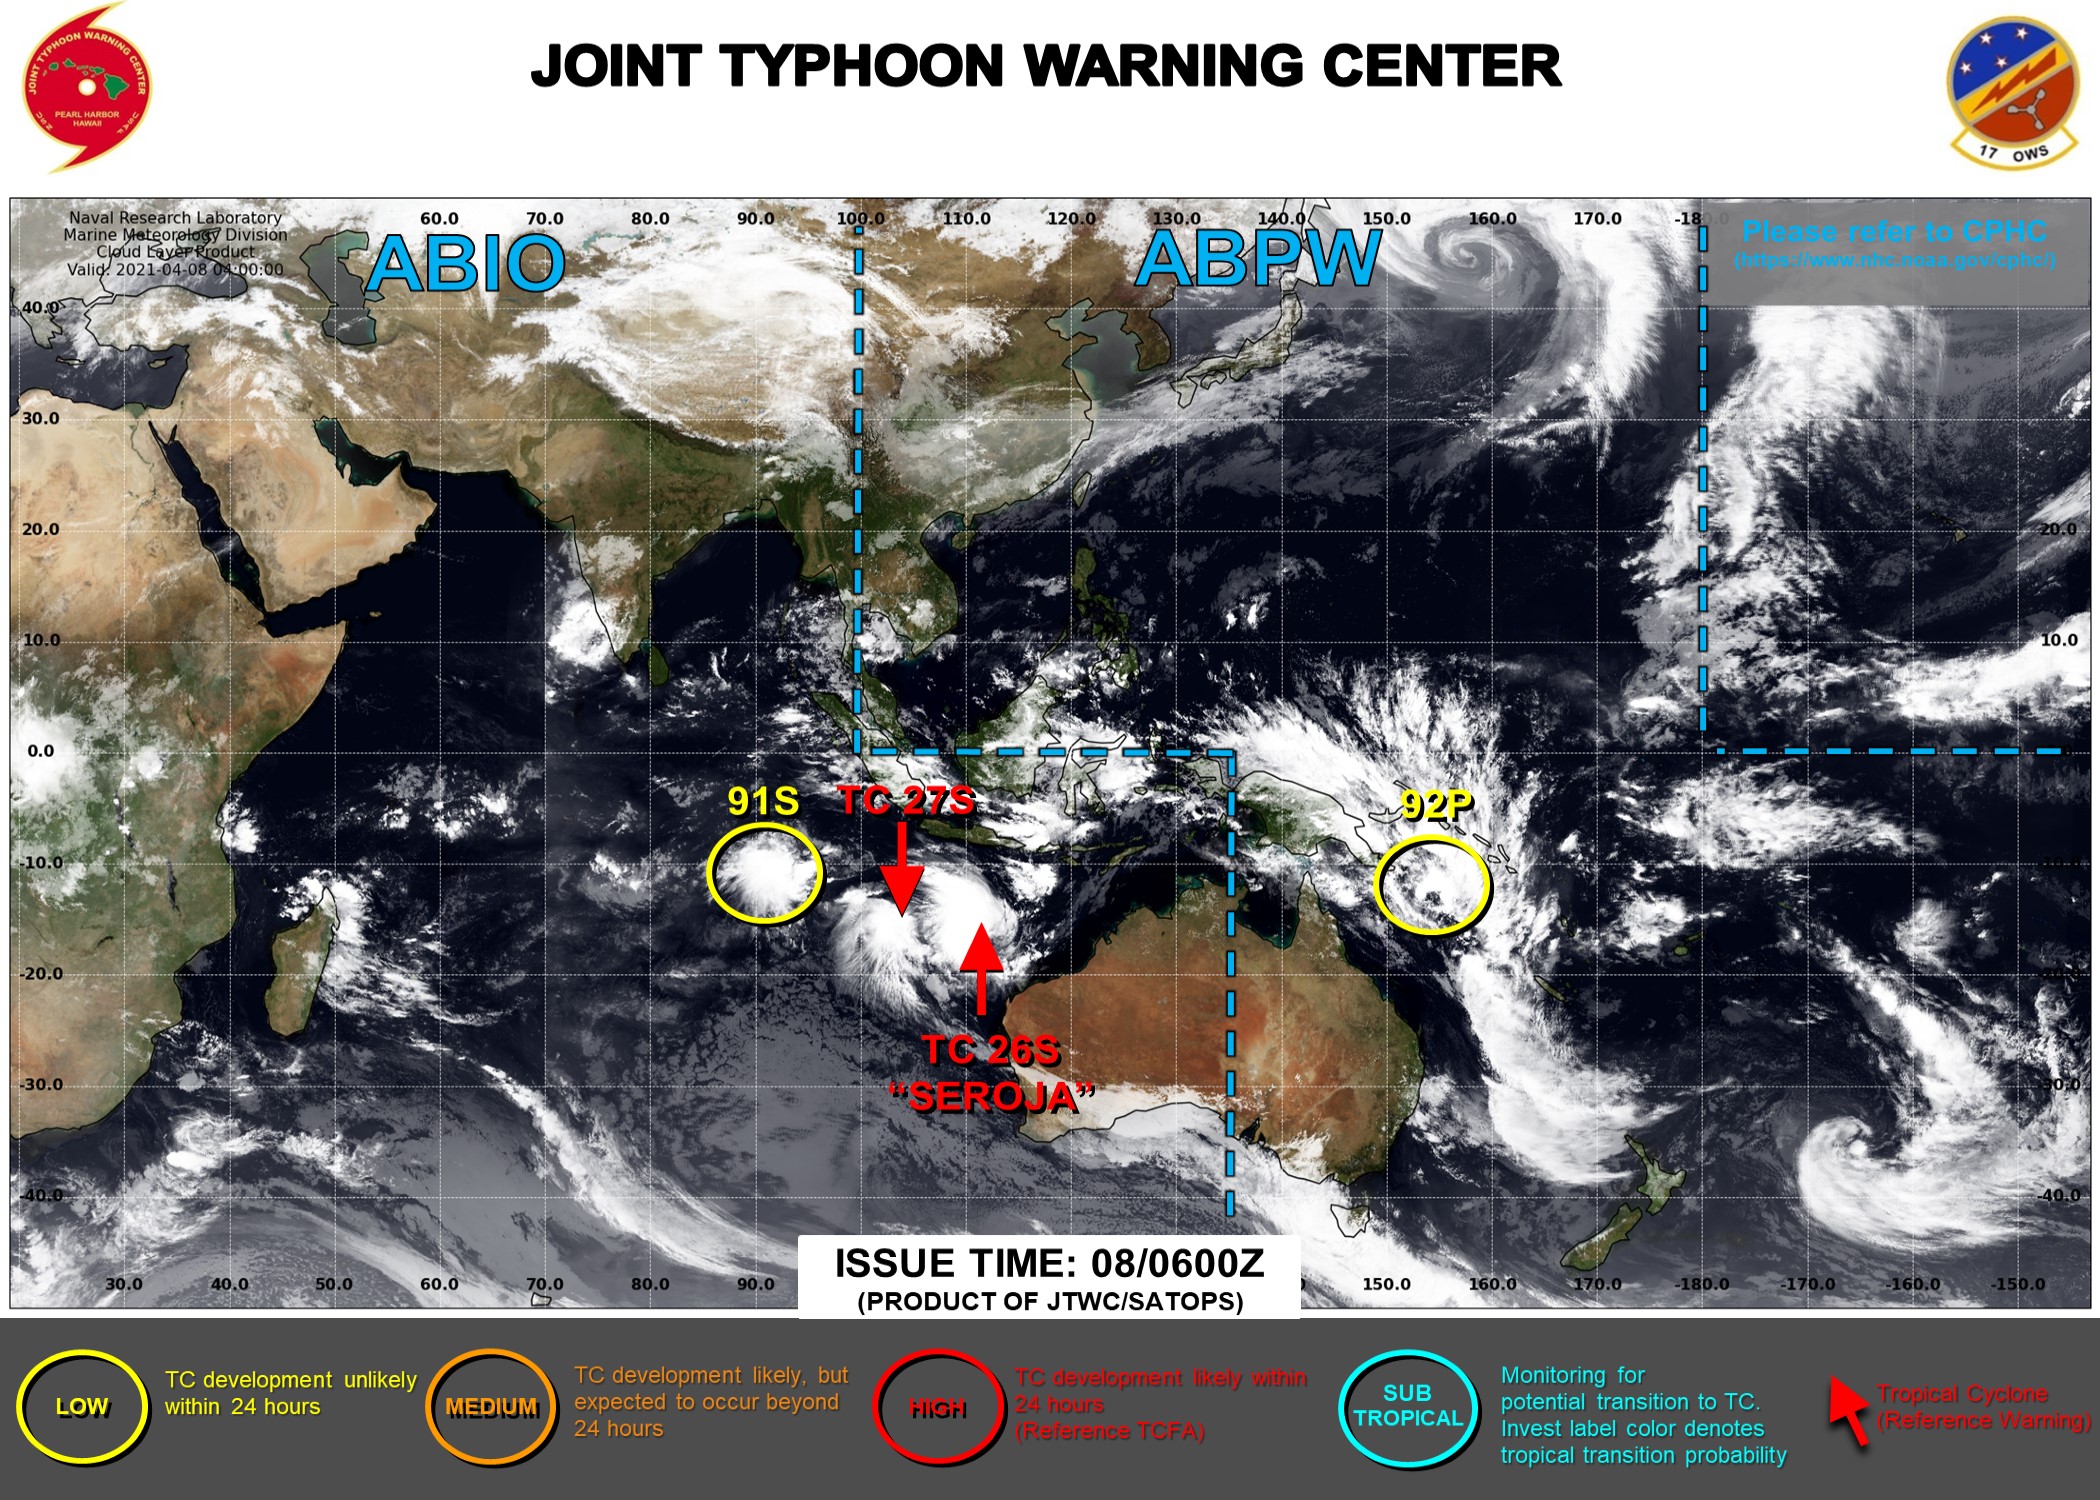 08/06UTC. JTWC IS ISSUING 6HOURLY WARNINGS ON TC 26S(SEROJA) AND ON TC 27S. 3HOURLY SATELLITE BULLETINS ARE ISSUED FOR BOTH SYSTEMS.